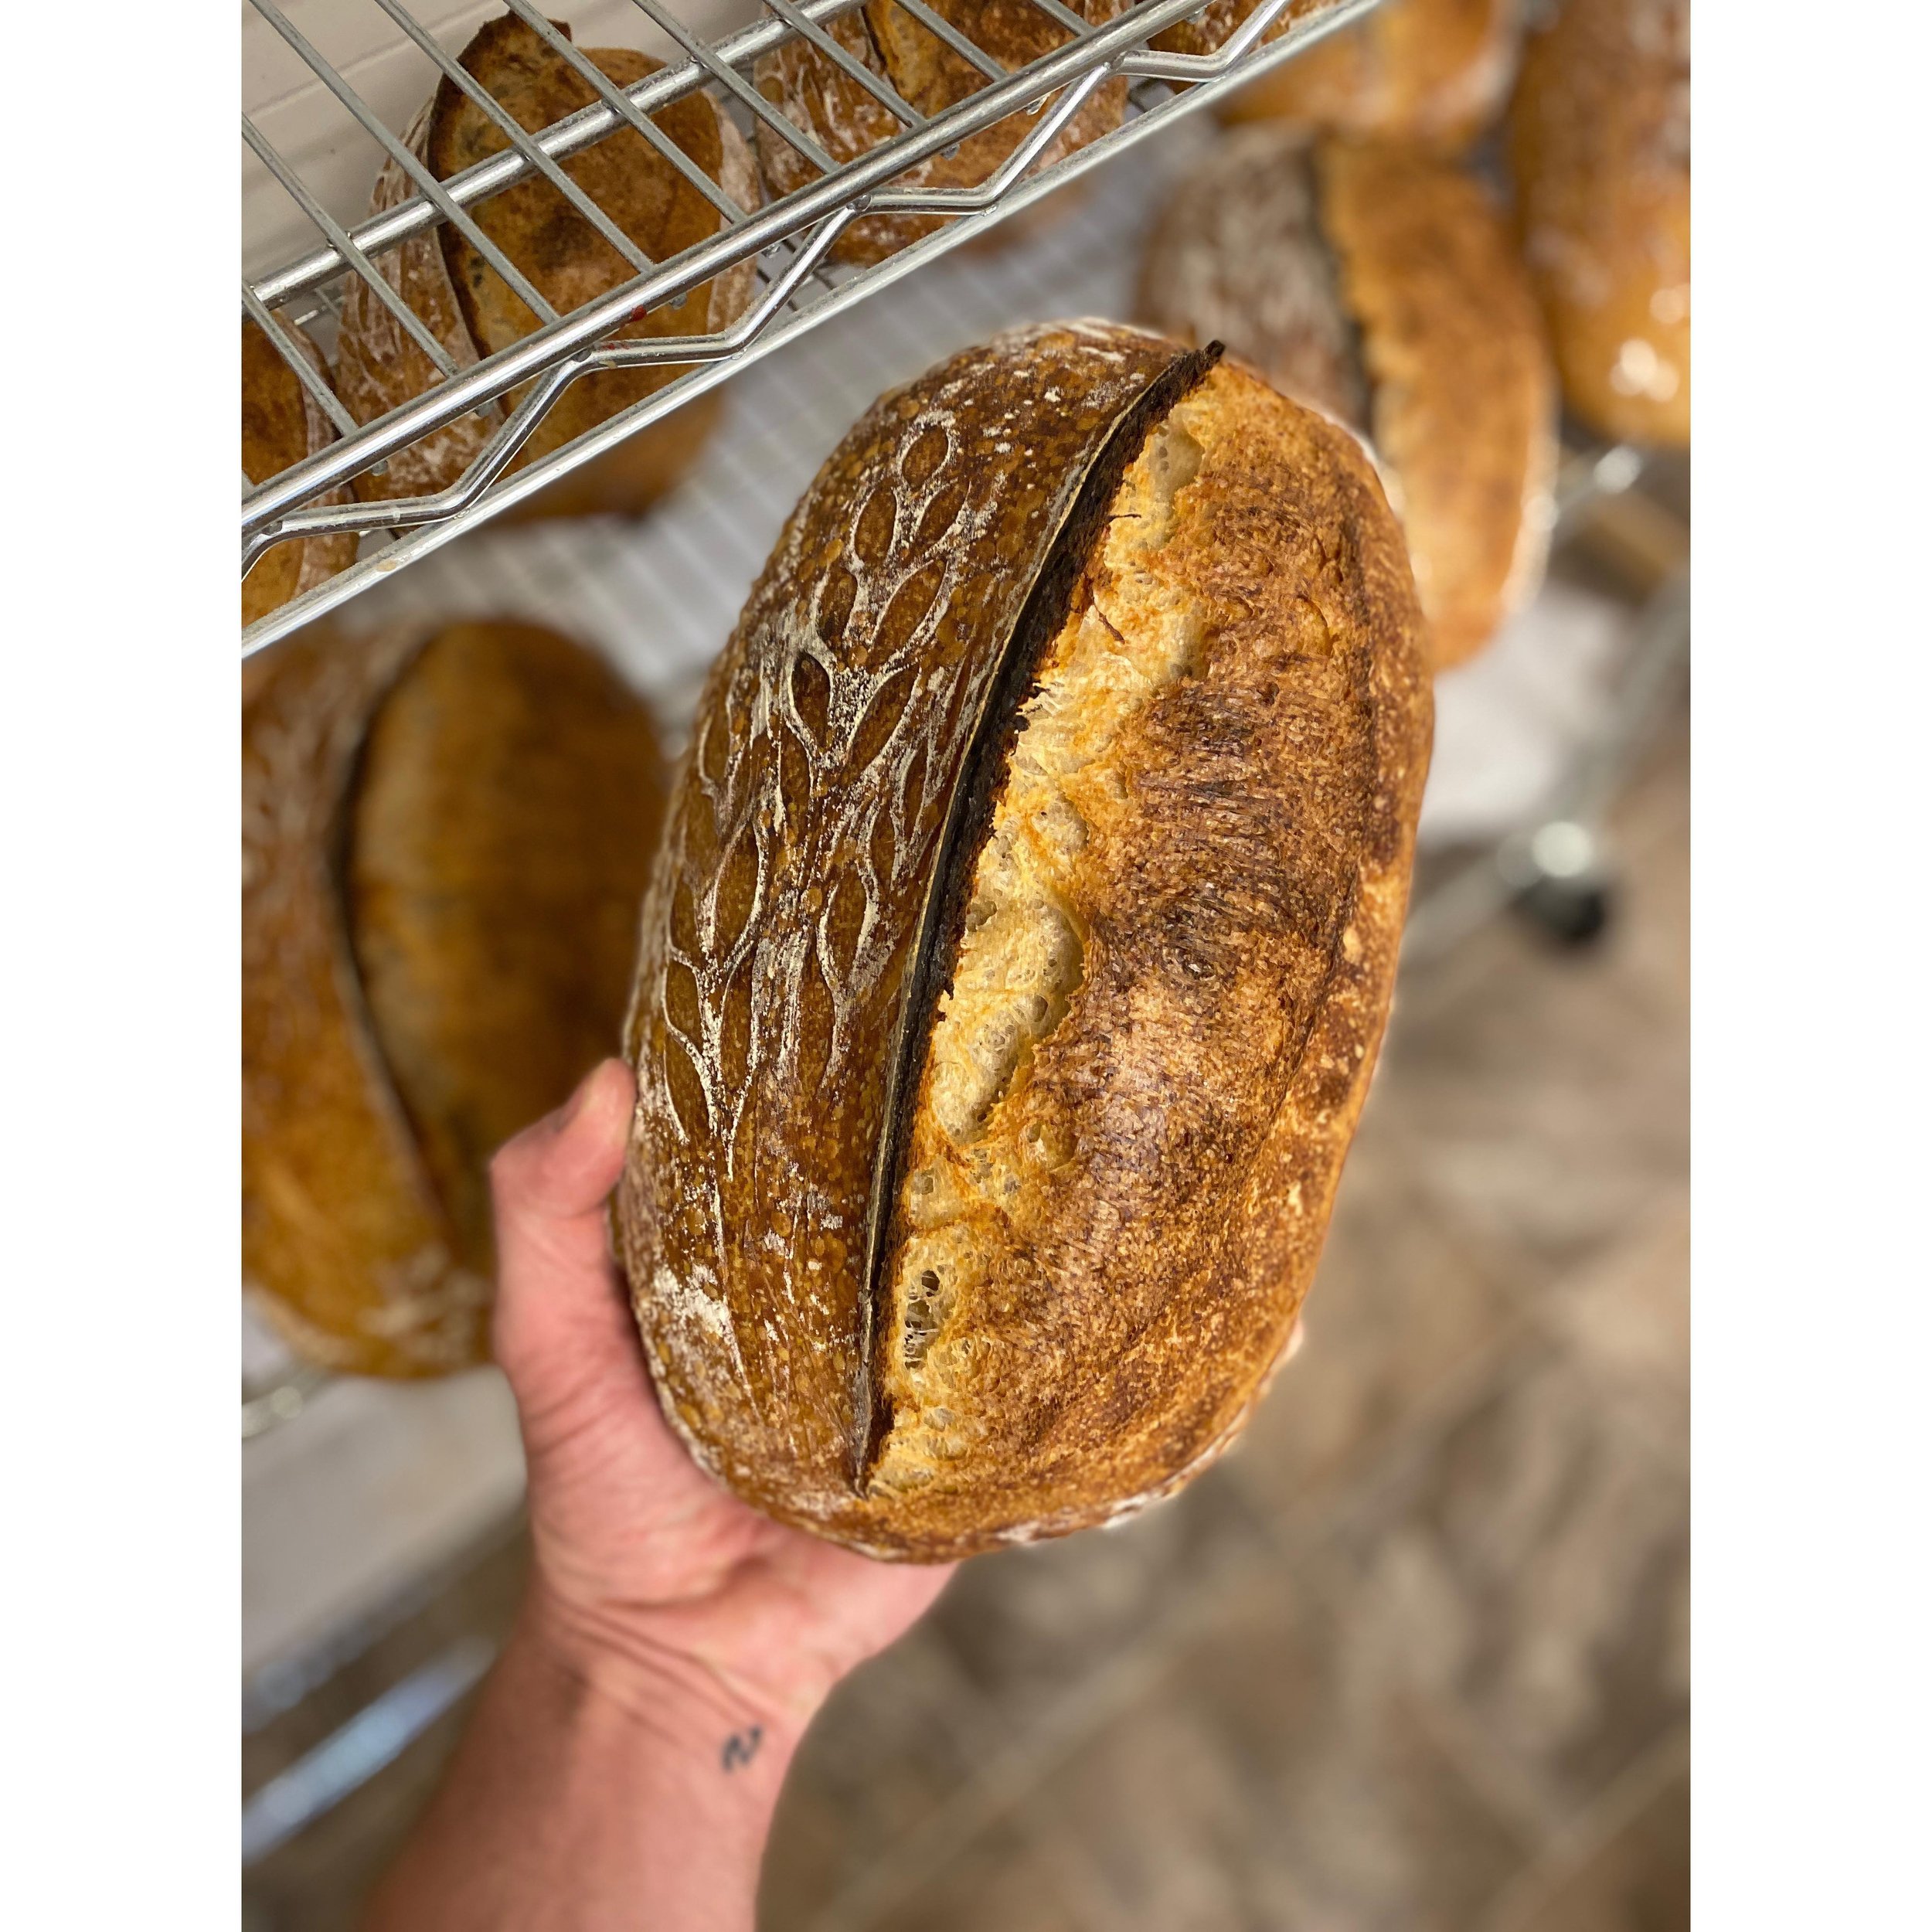 Menu is up for this week with all kinds of tasty things like Jalape&ntilde;o Cheddar, Sesame Semolina Epis and this Rouge de Bordeaux Country loaf. Link in bio!